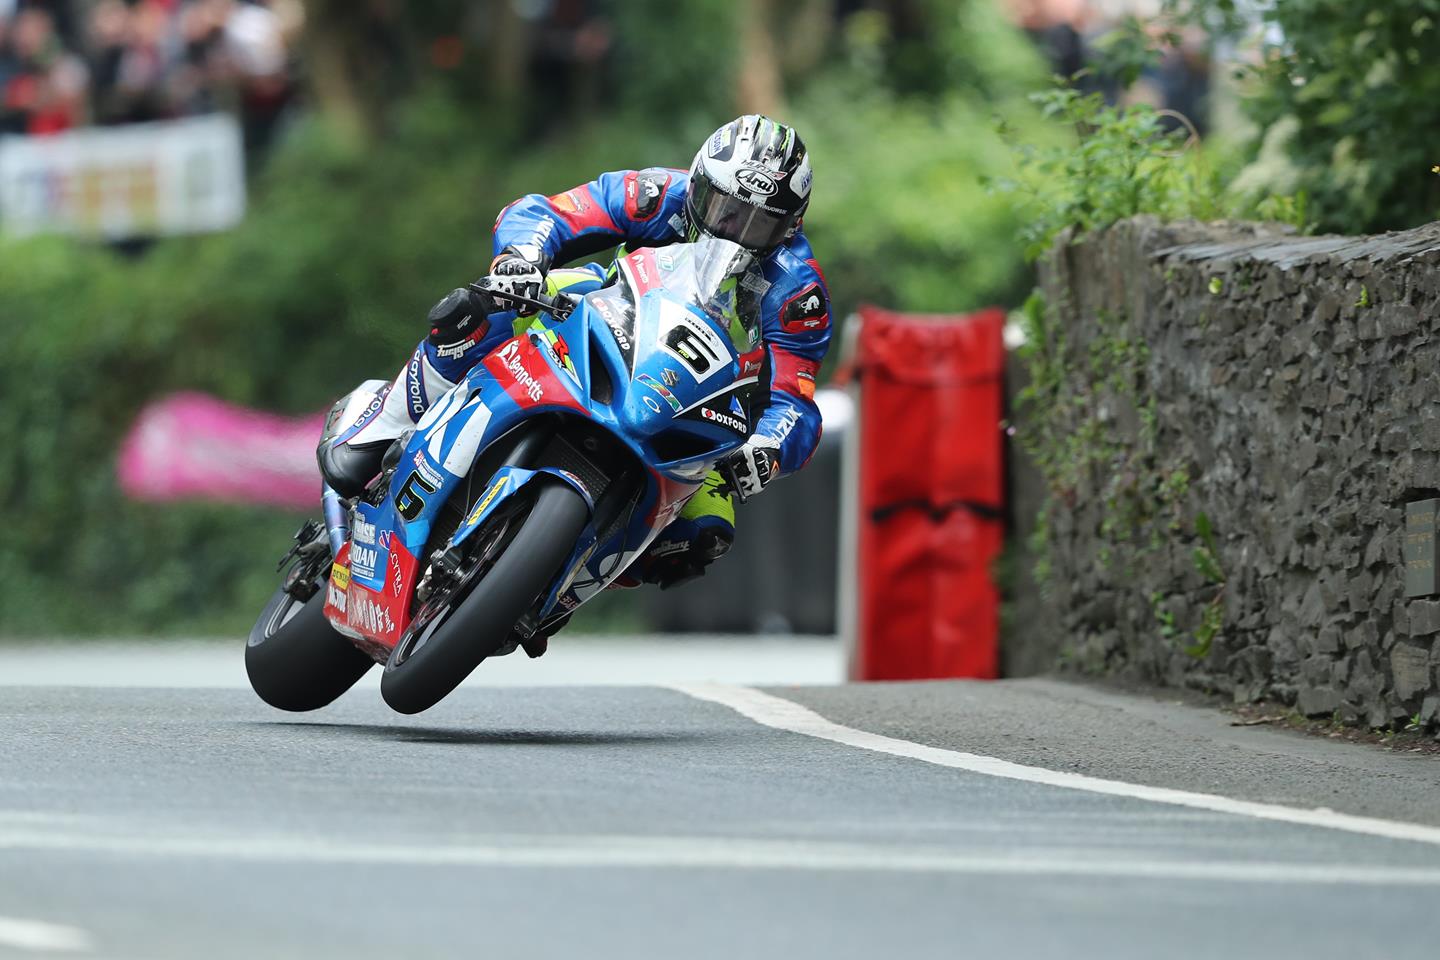 TT's greatest races: Best of the best | MCN